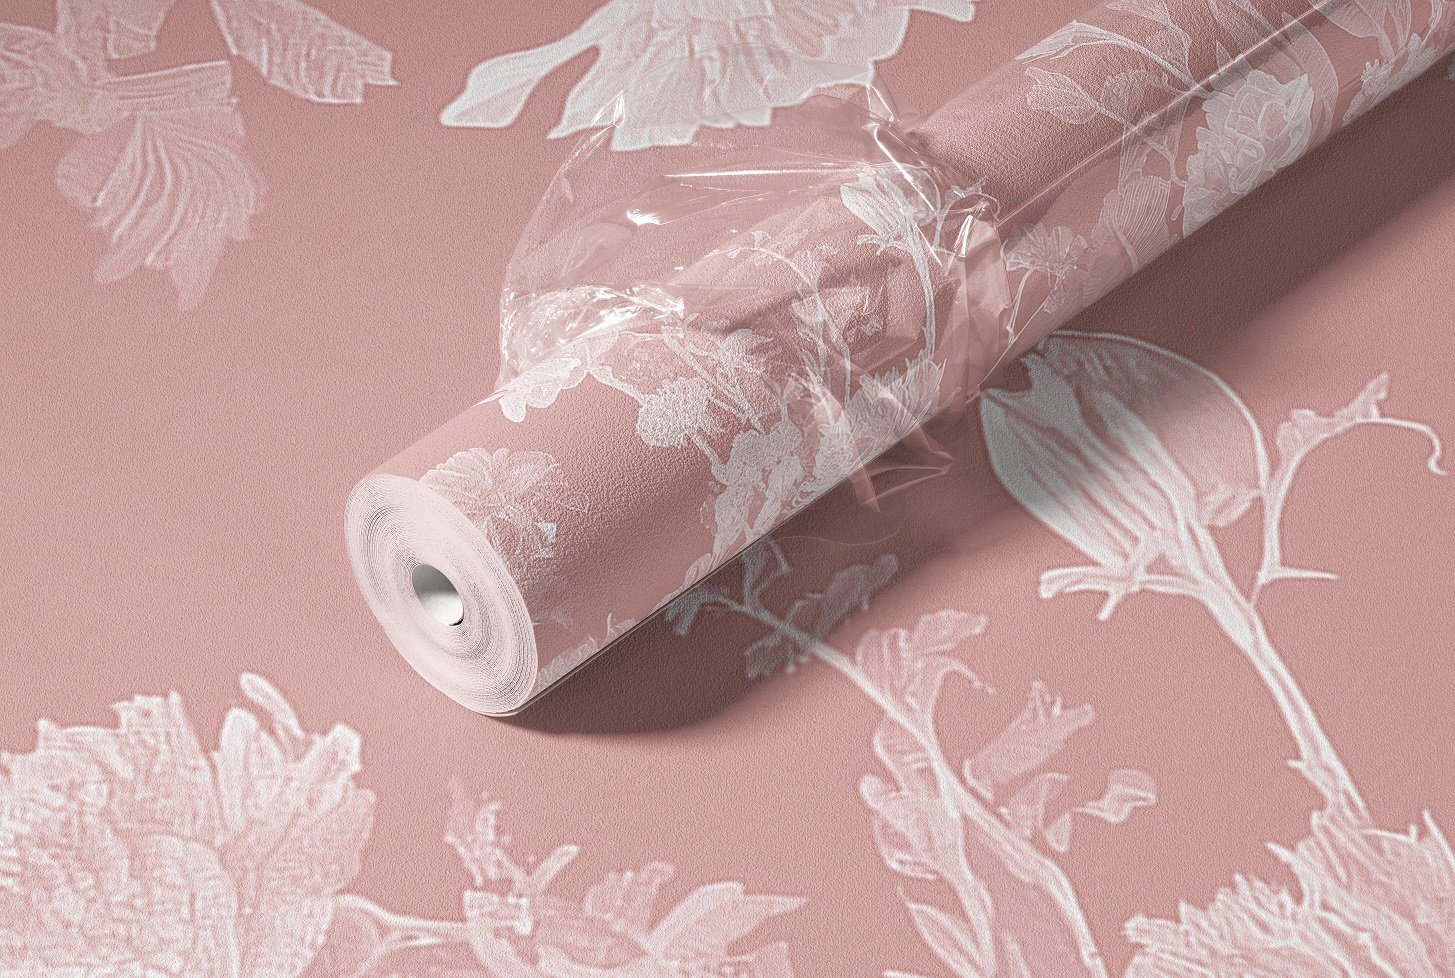 Discover Why Peel and Stick Wallpaper is Your New Home Decor Trend